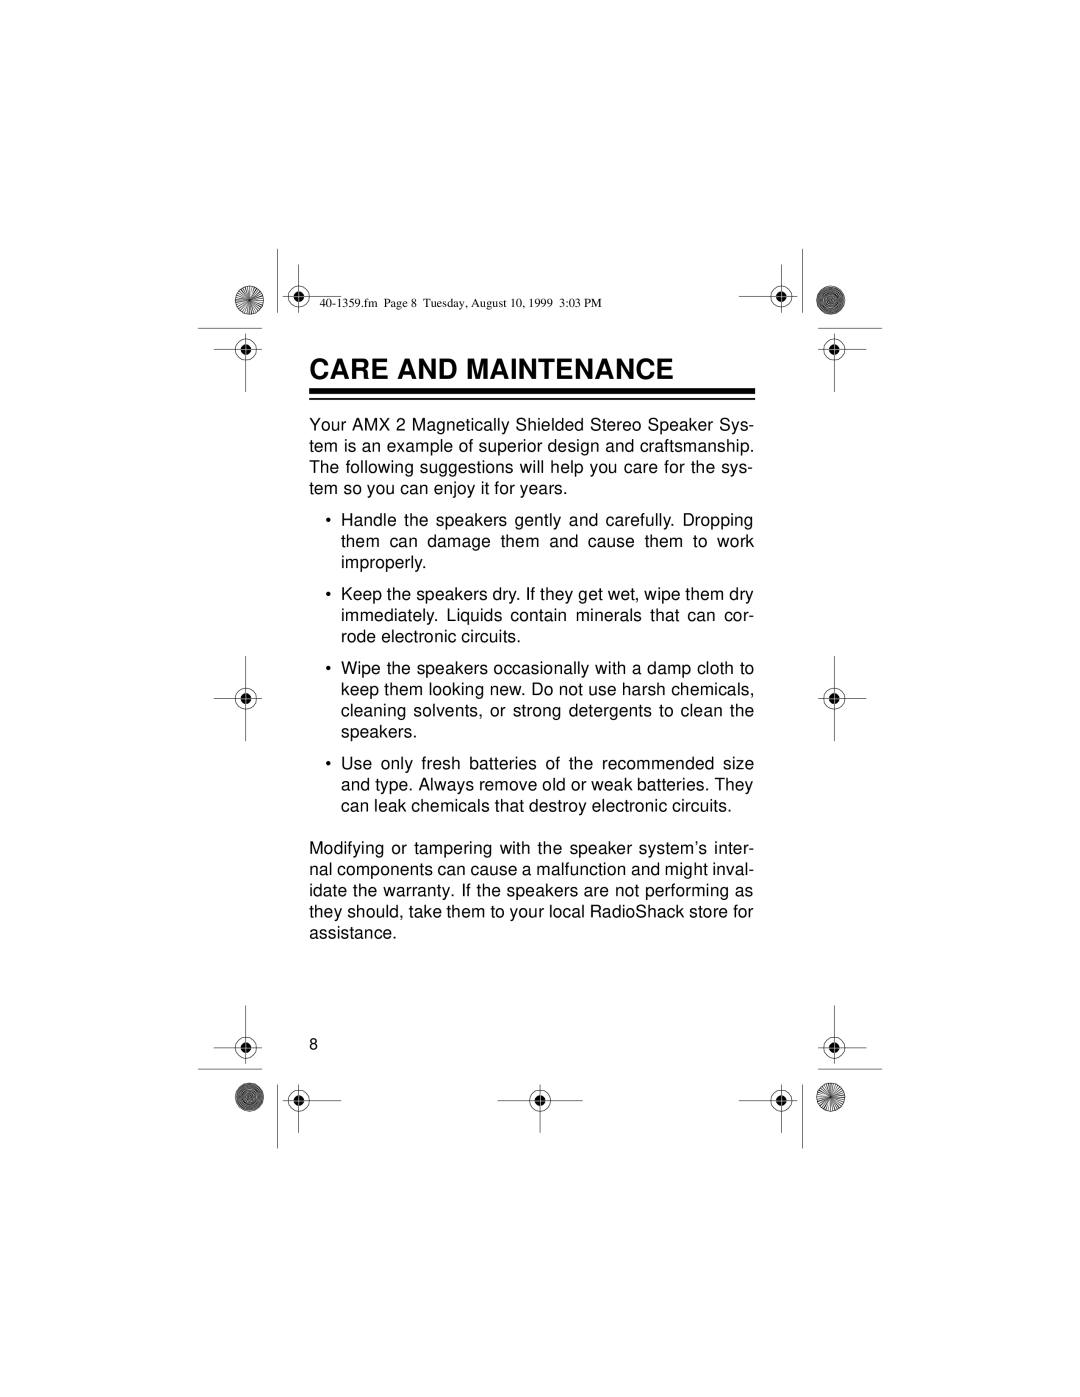 Panasonic AMX 2 owner manual Care And Maintenance, fmPage 8 Tuesday, August 10, 1999 3 03 PM 